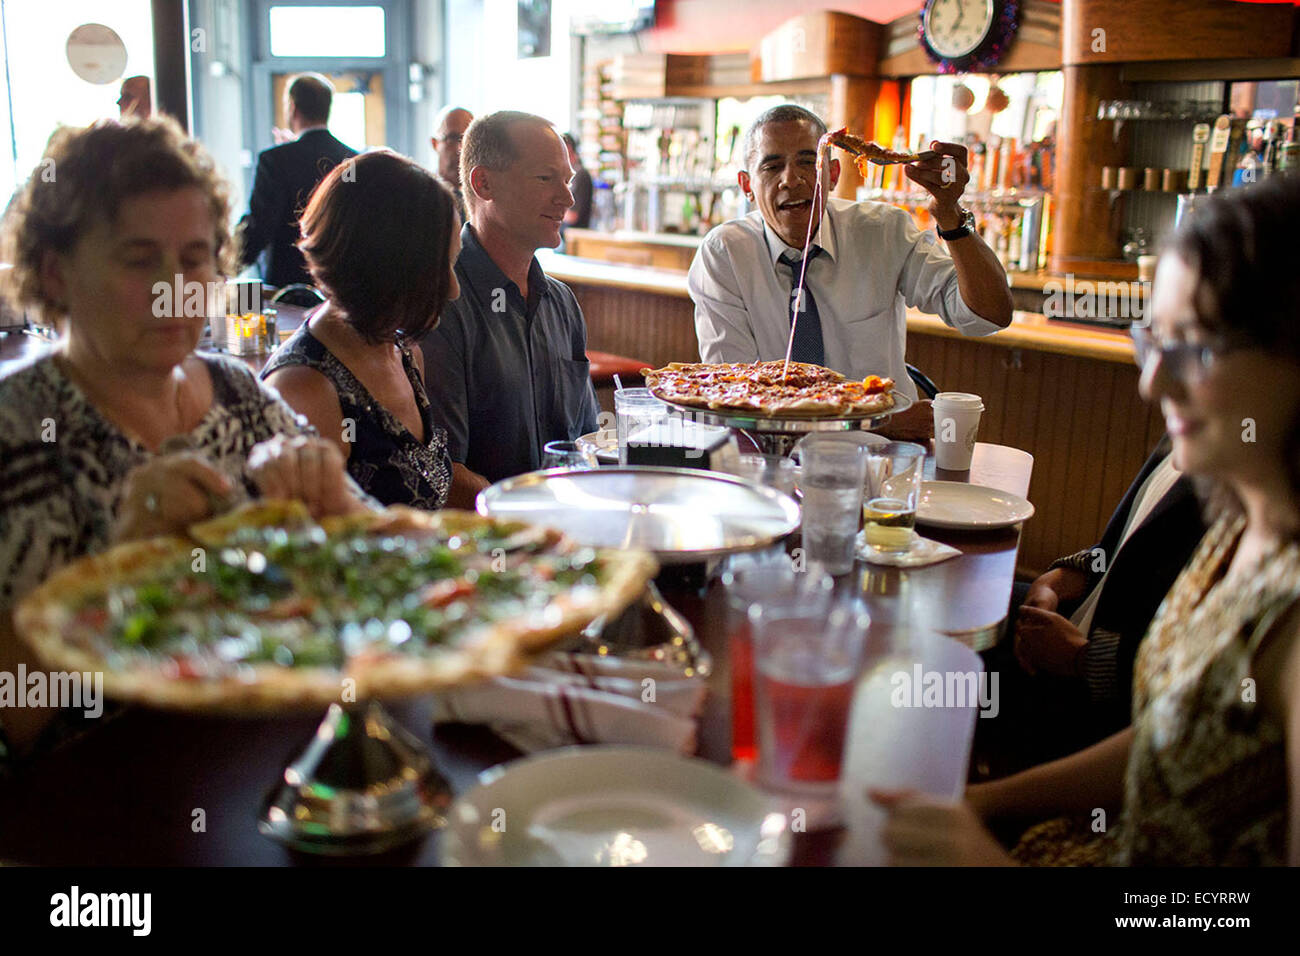 President Barack Obama shares a pizza dinner with individuals who wrote letters to him, at the Wazee Supper Club in Denver, Colo., July 8, 2014. Stock Photo